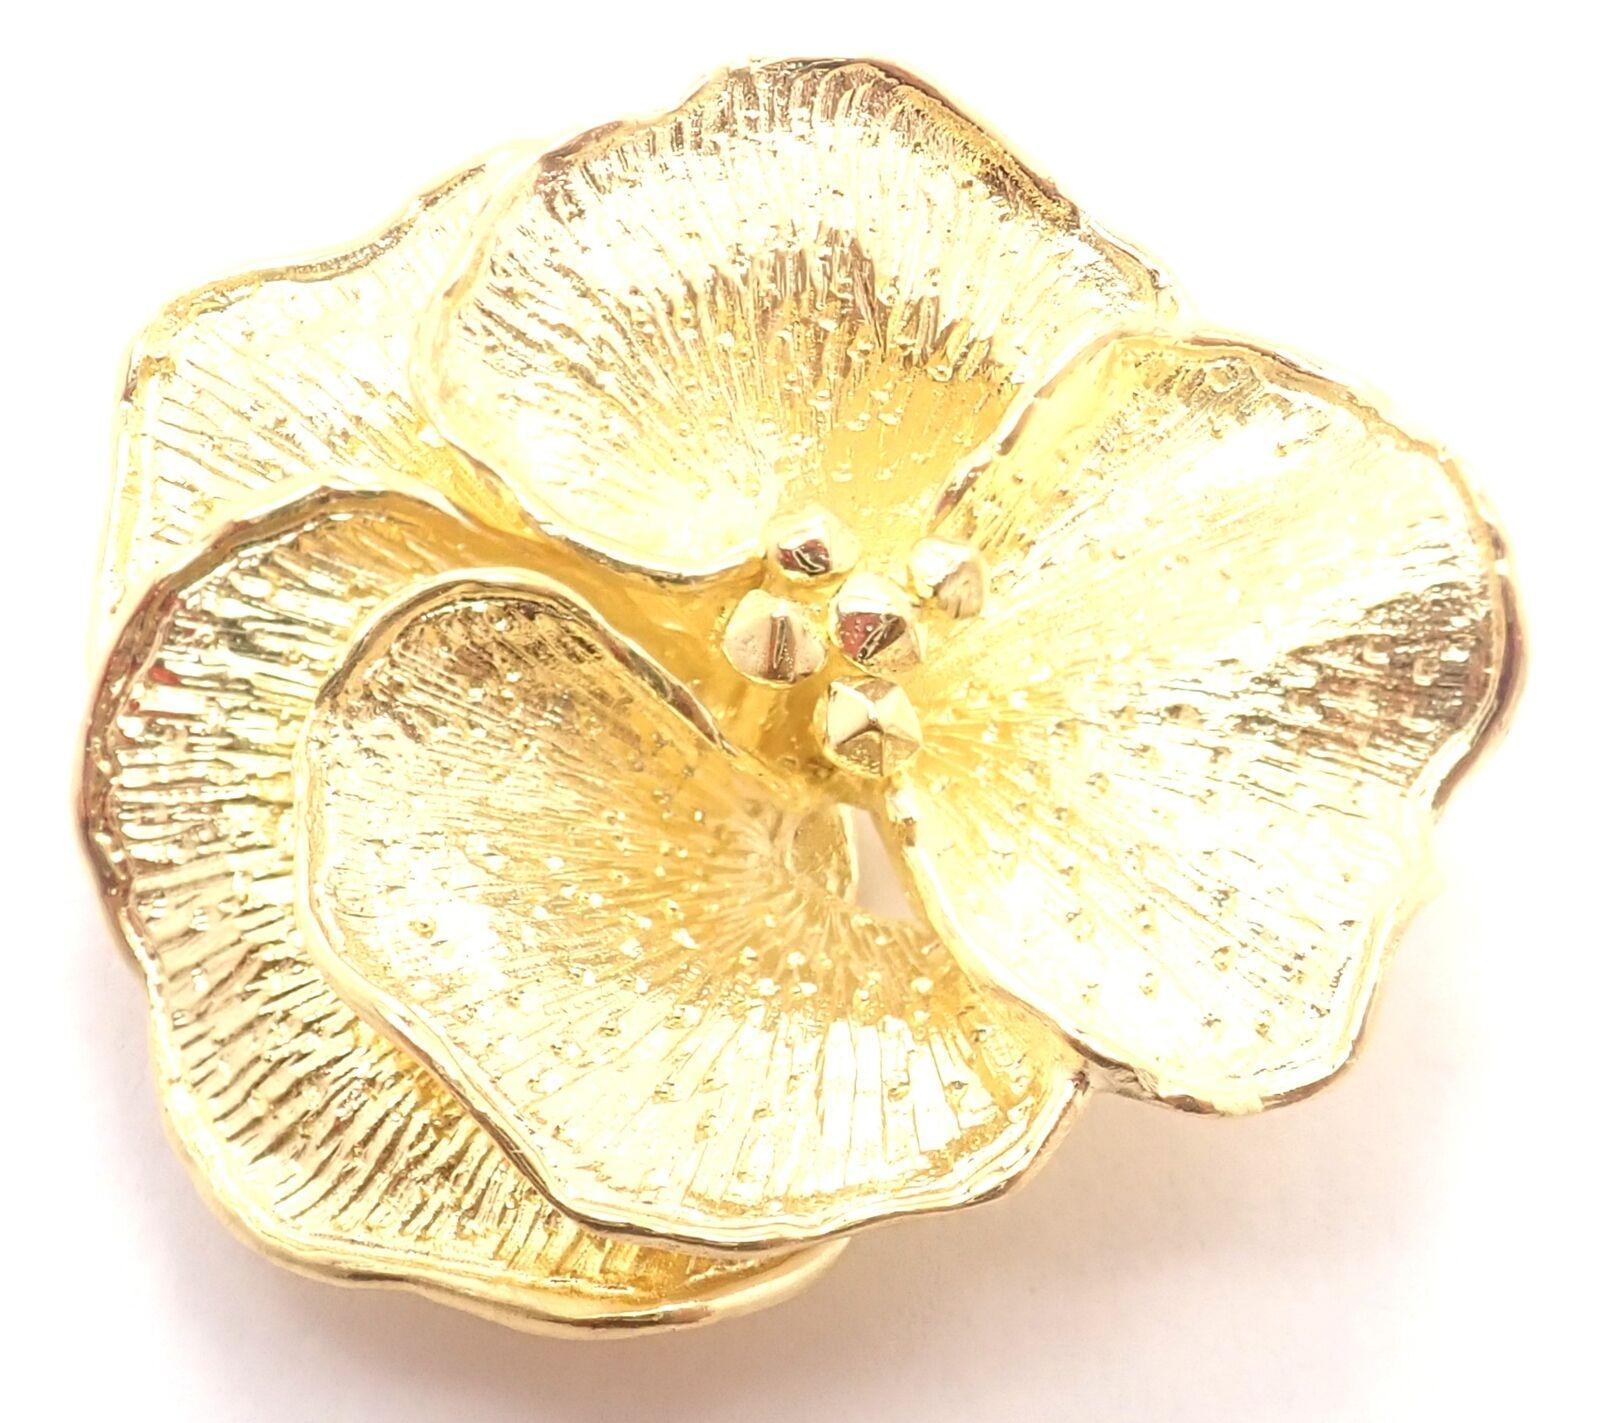 18k Yellow Gold Pansy Flower Brooch Pin by Tiffany & Co.
Details: 
Weight: 15.9 grams
Measurements: 34mm x 31mm
Stamped Hallmarks: Tiffany &Co 18k Italy
YOUR PRICE: $4,000
T3201mned